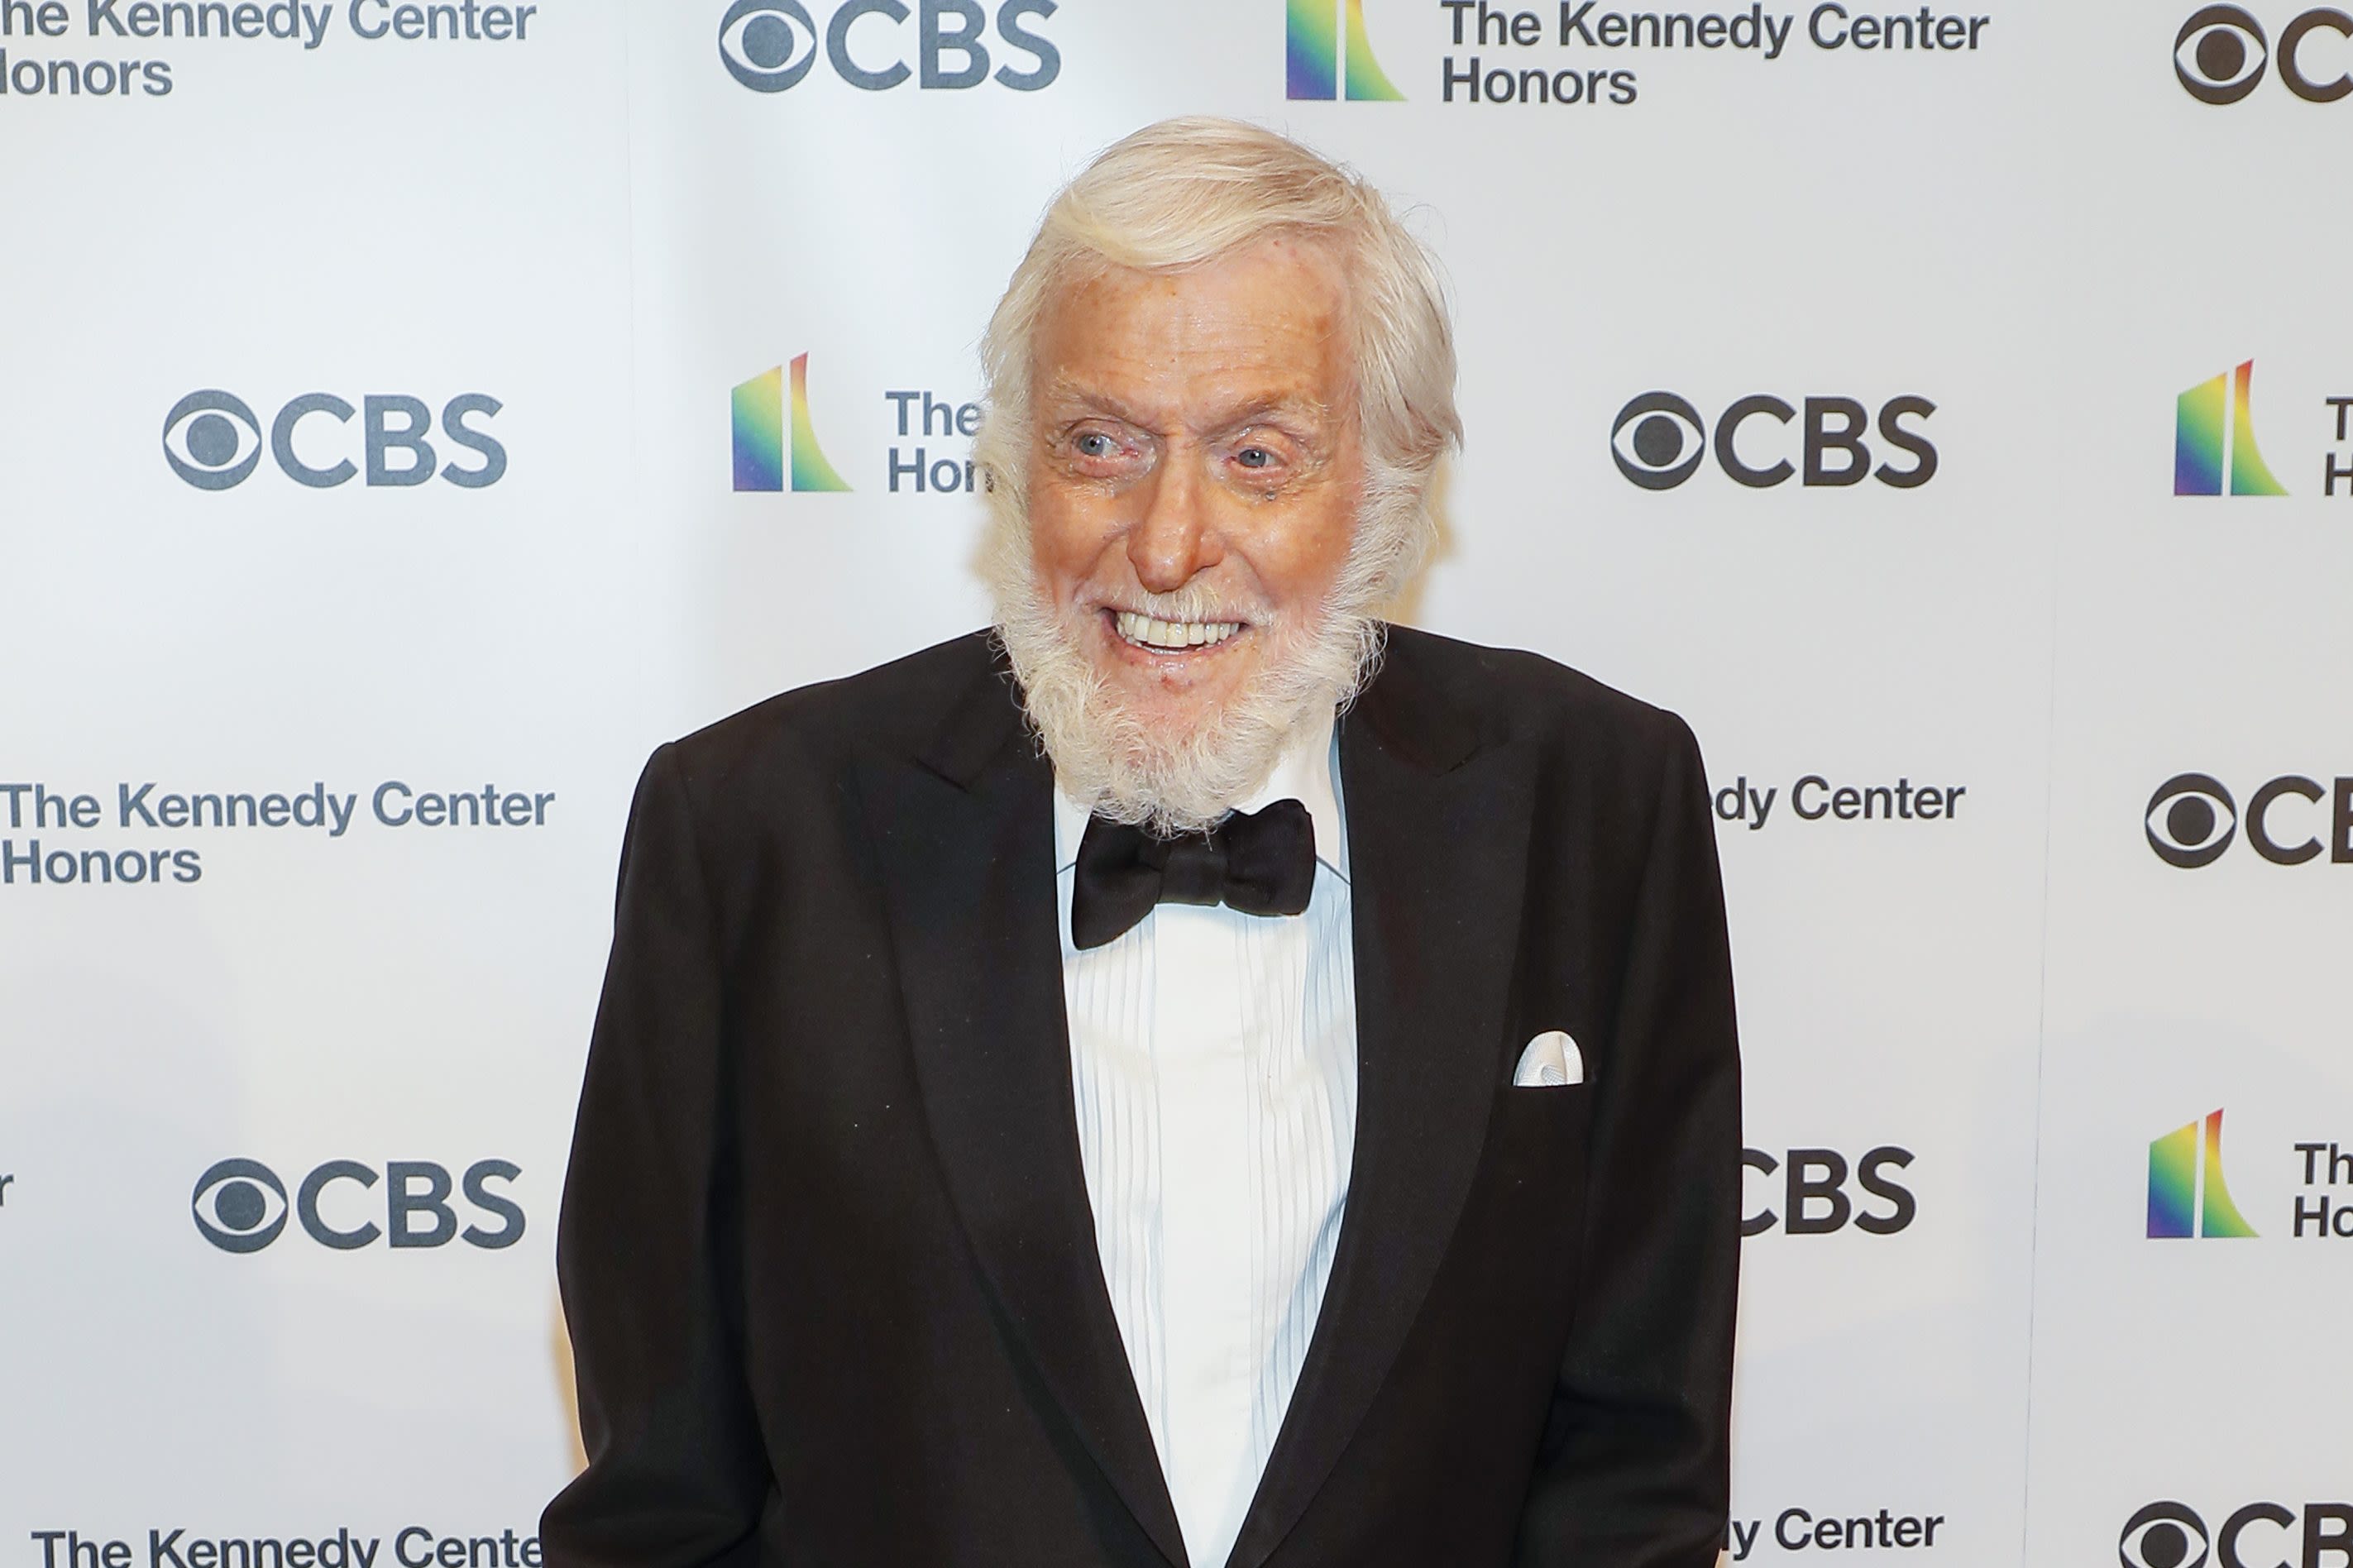 Dick Van Dyke Makes History as Oldest Daytime Emmys Winner Ever, at 98